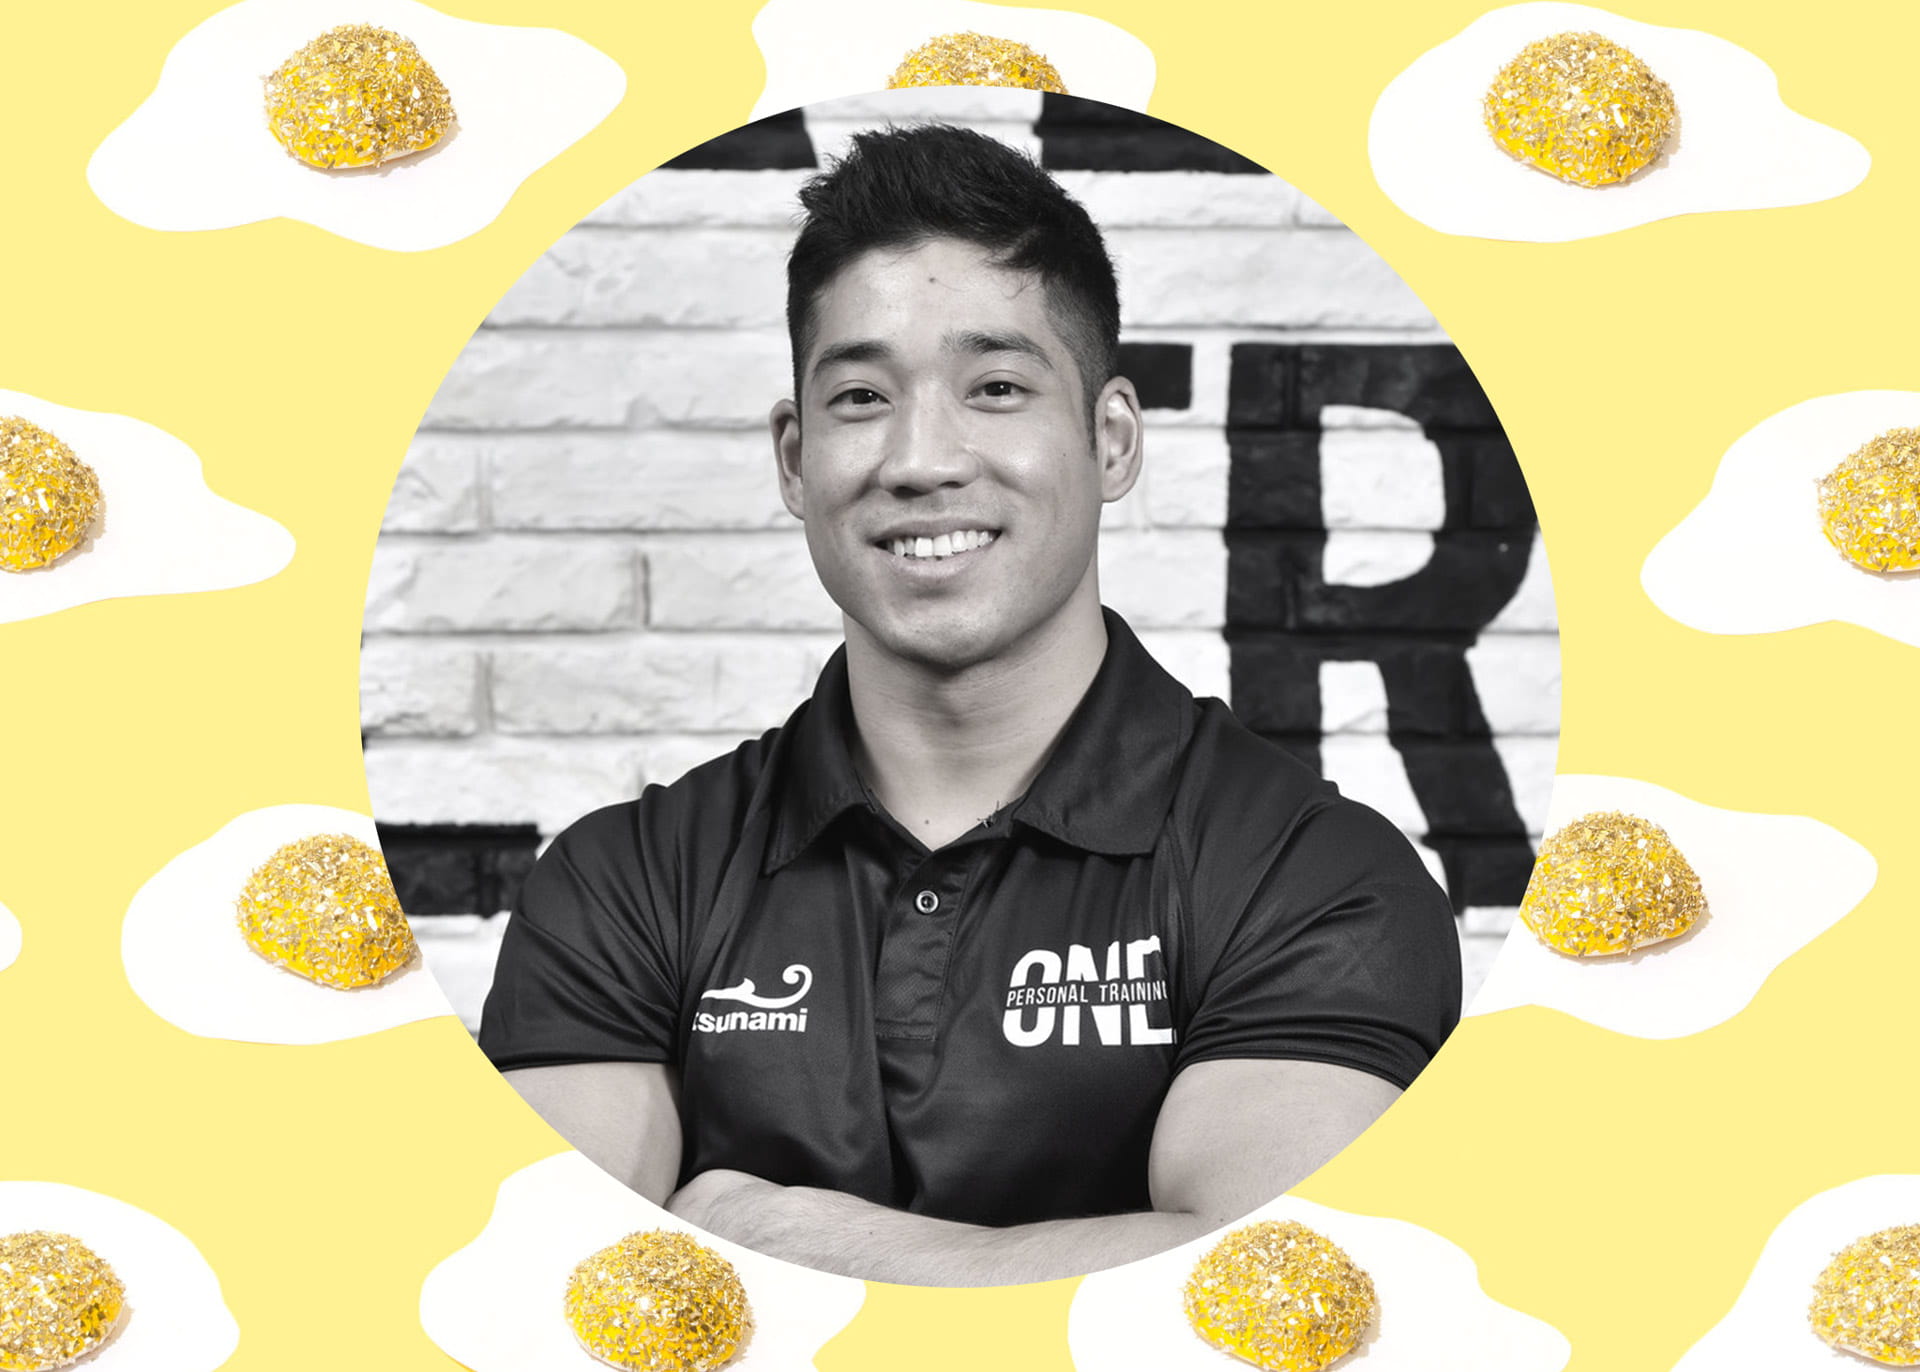 Benjamin Liu, transformation and strength coach and founder of ONE Personal Training